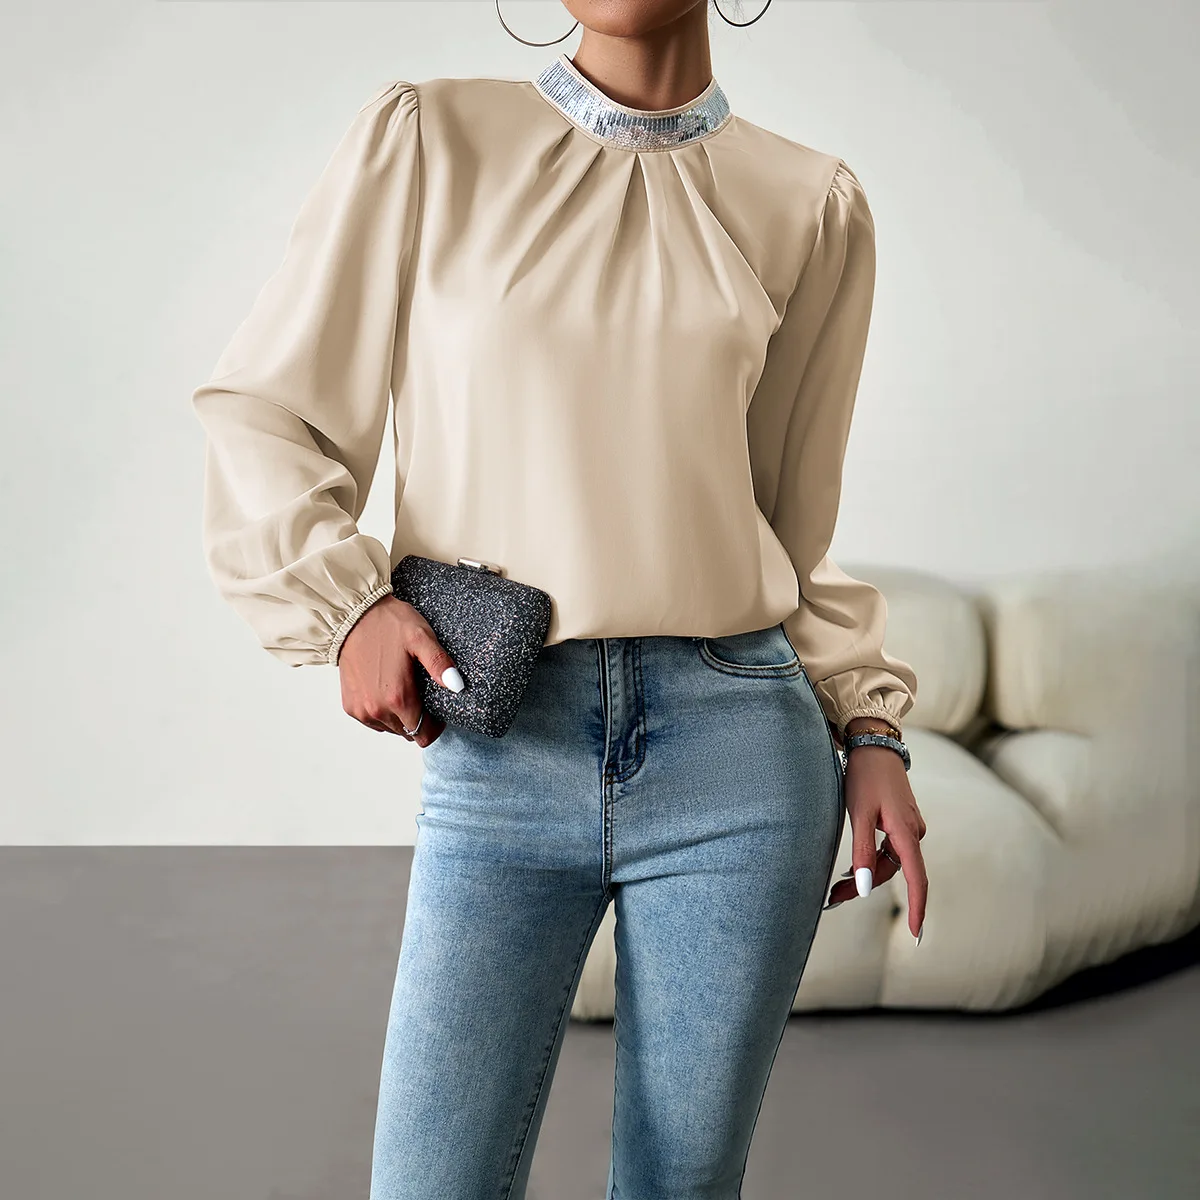 Office Lady Shirts and Blouses Women Tops Long Sleeve Outfit Solid Crewneck Vintage Streetwear Autumn Female Clothing Camisas autumn and winter new men s pure cashmere sweater crewneck jacquard solid color striped bottom shirt youth korean casual sweater